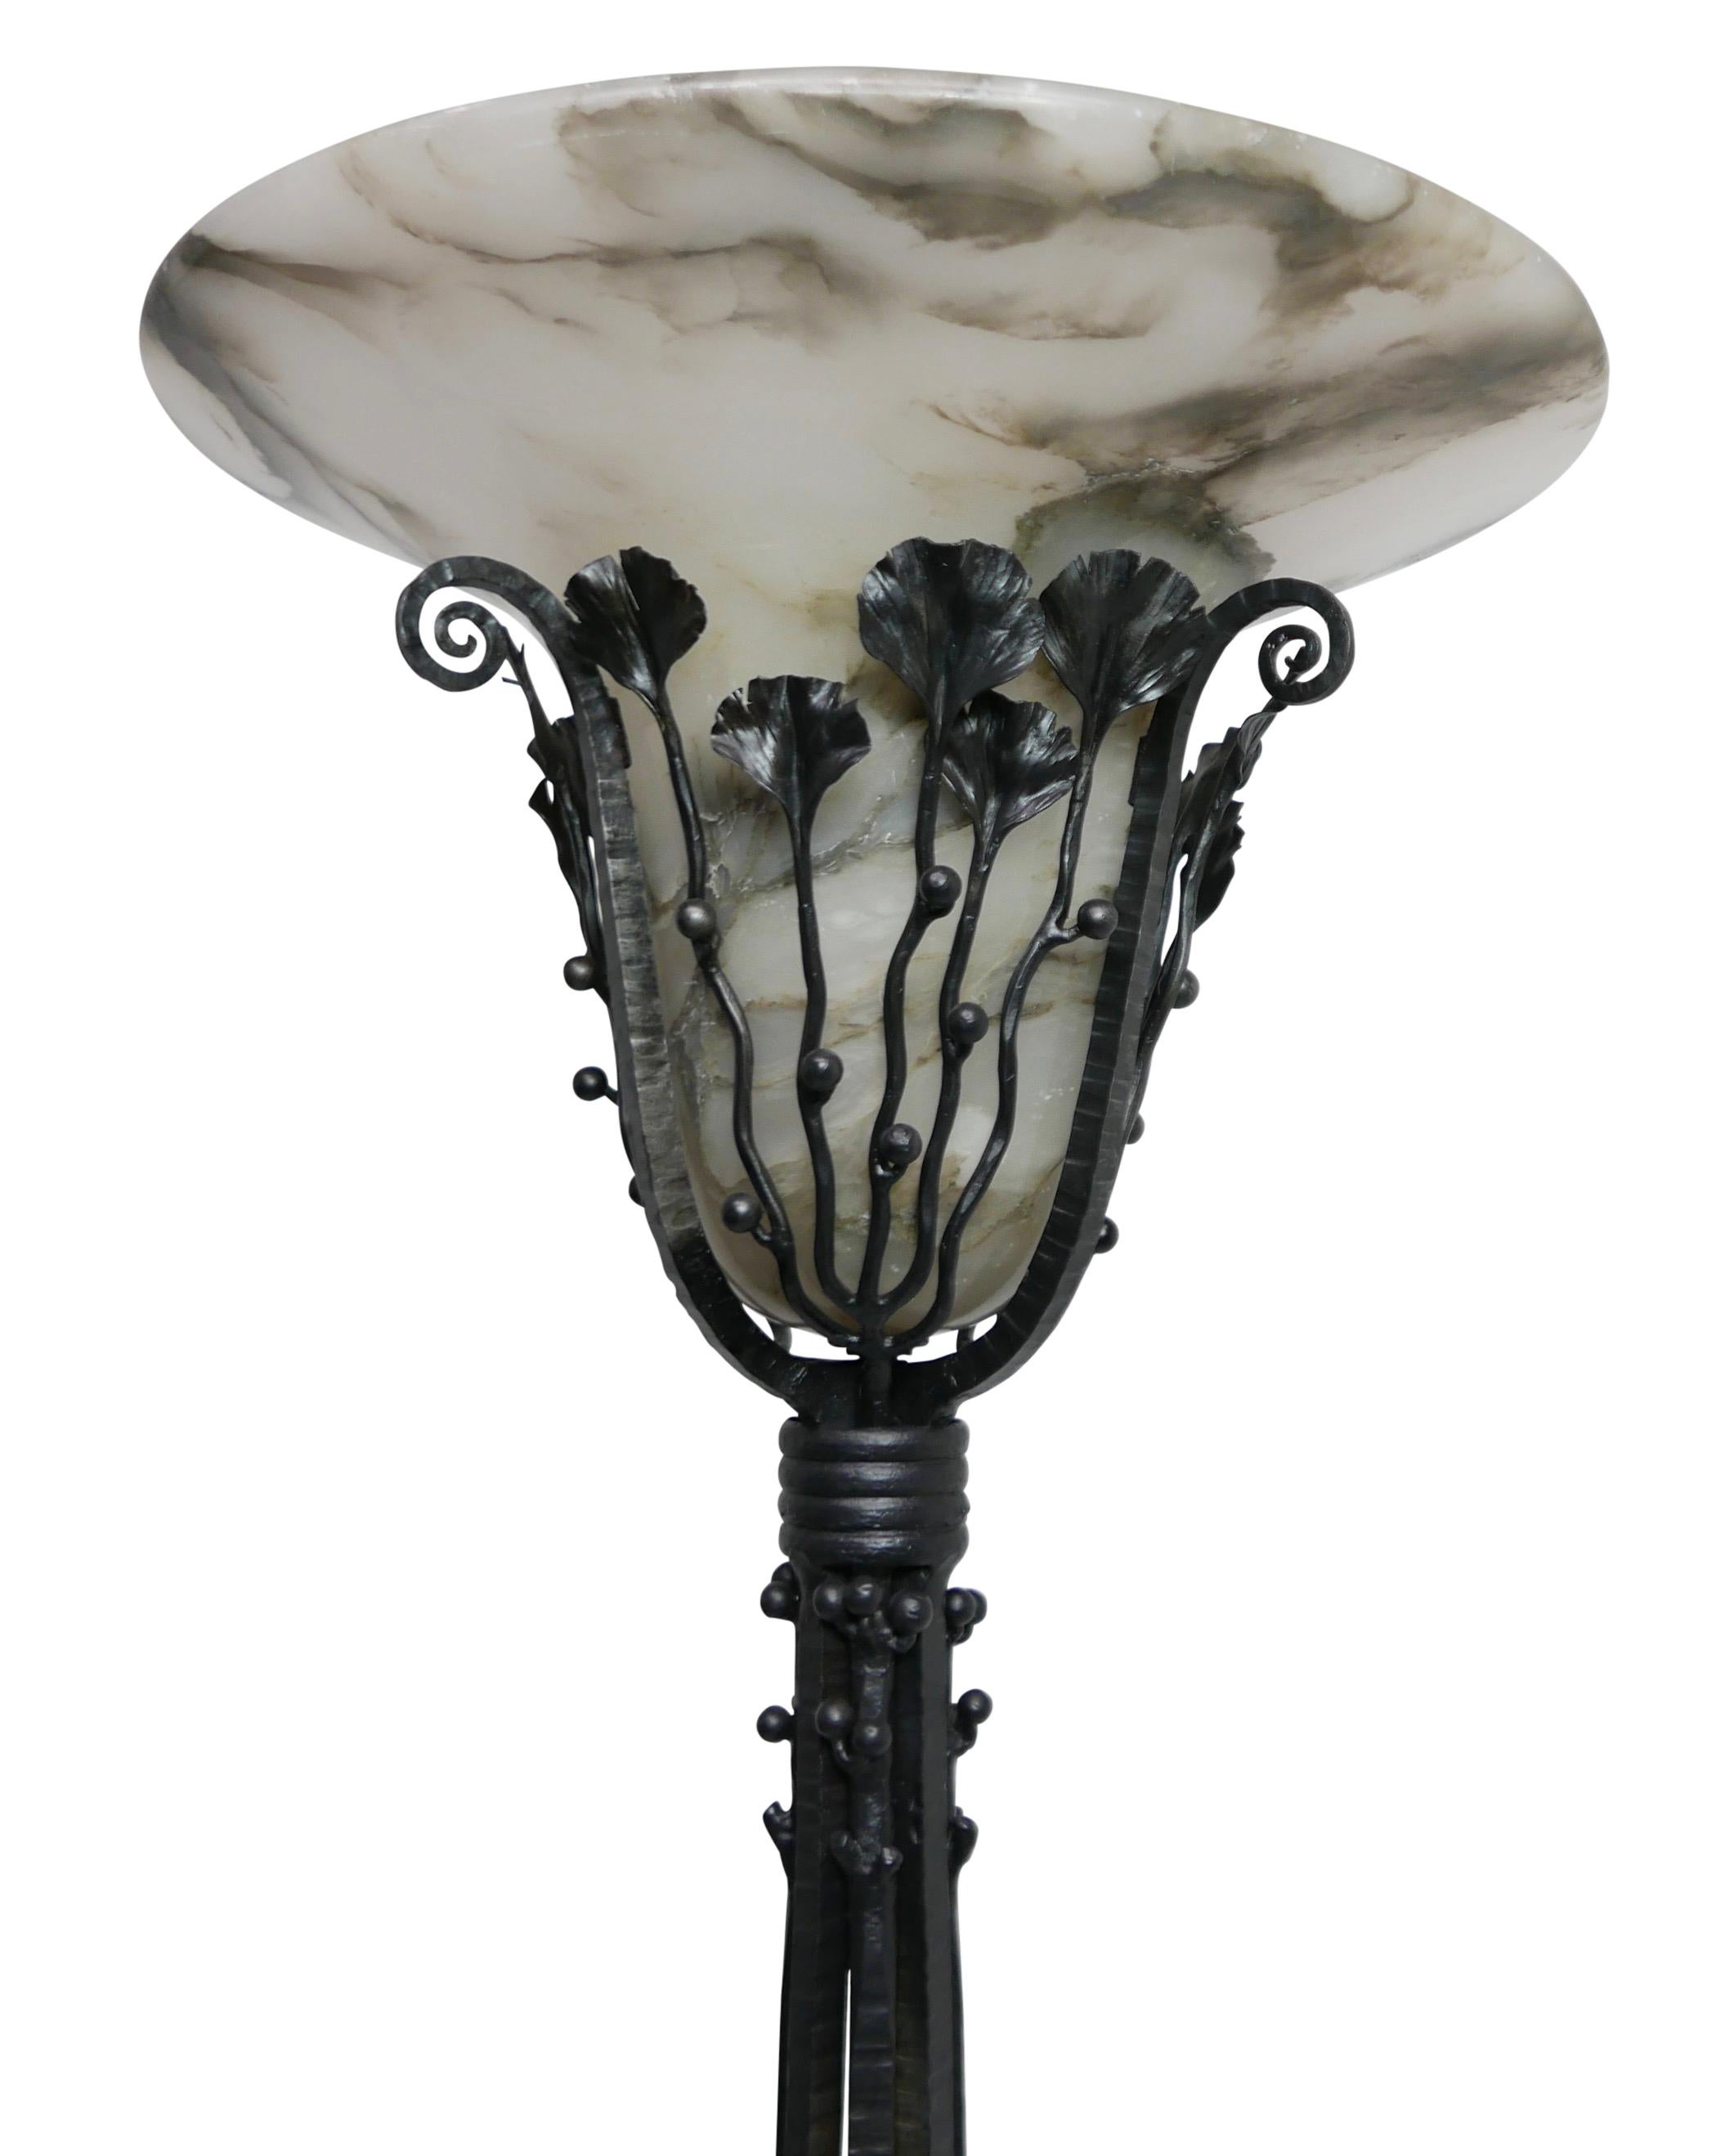 Art Deco Wrought Iron Floor Lamp with Alabaster Shade, French, circa 1920 In Good Condition For Sale In San Francisco, CA